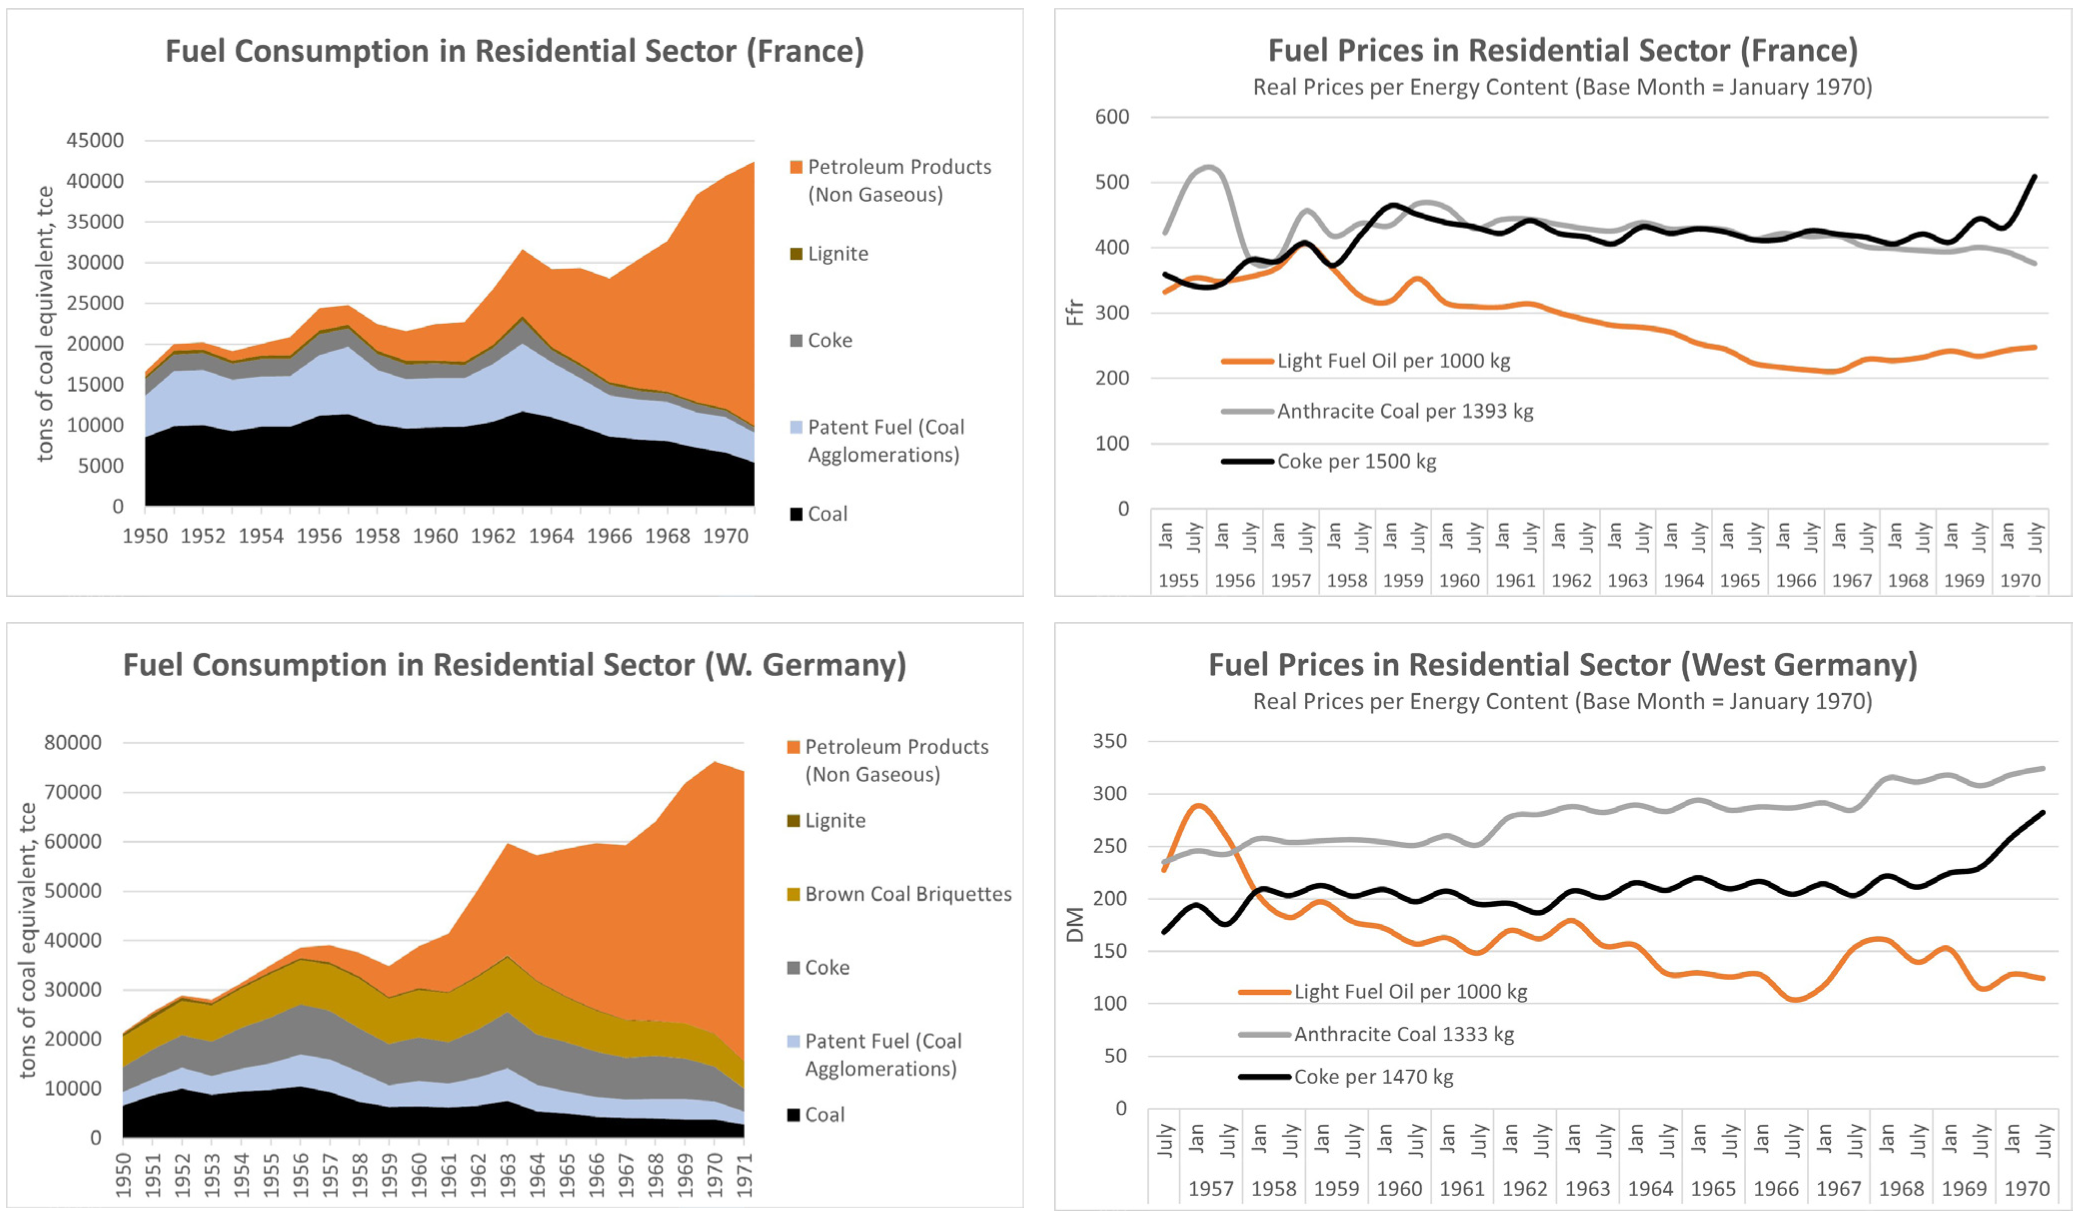 Figure 3: Consumption and Real Prices of Oil and Coal Products per Energy Content in France and West Germany (Residential Sector). Source: Statistical Office of the European Communities, A Comparison of Fuel Prices 1955-1970 (Luxembourg: Eurostat, 1974).